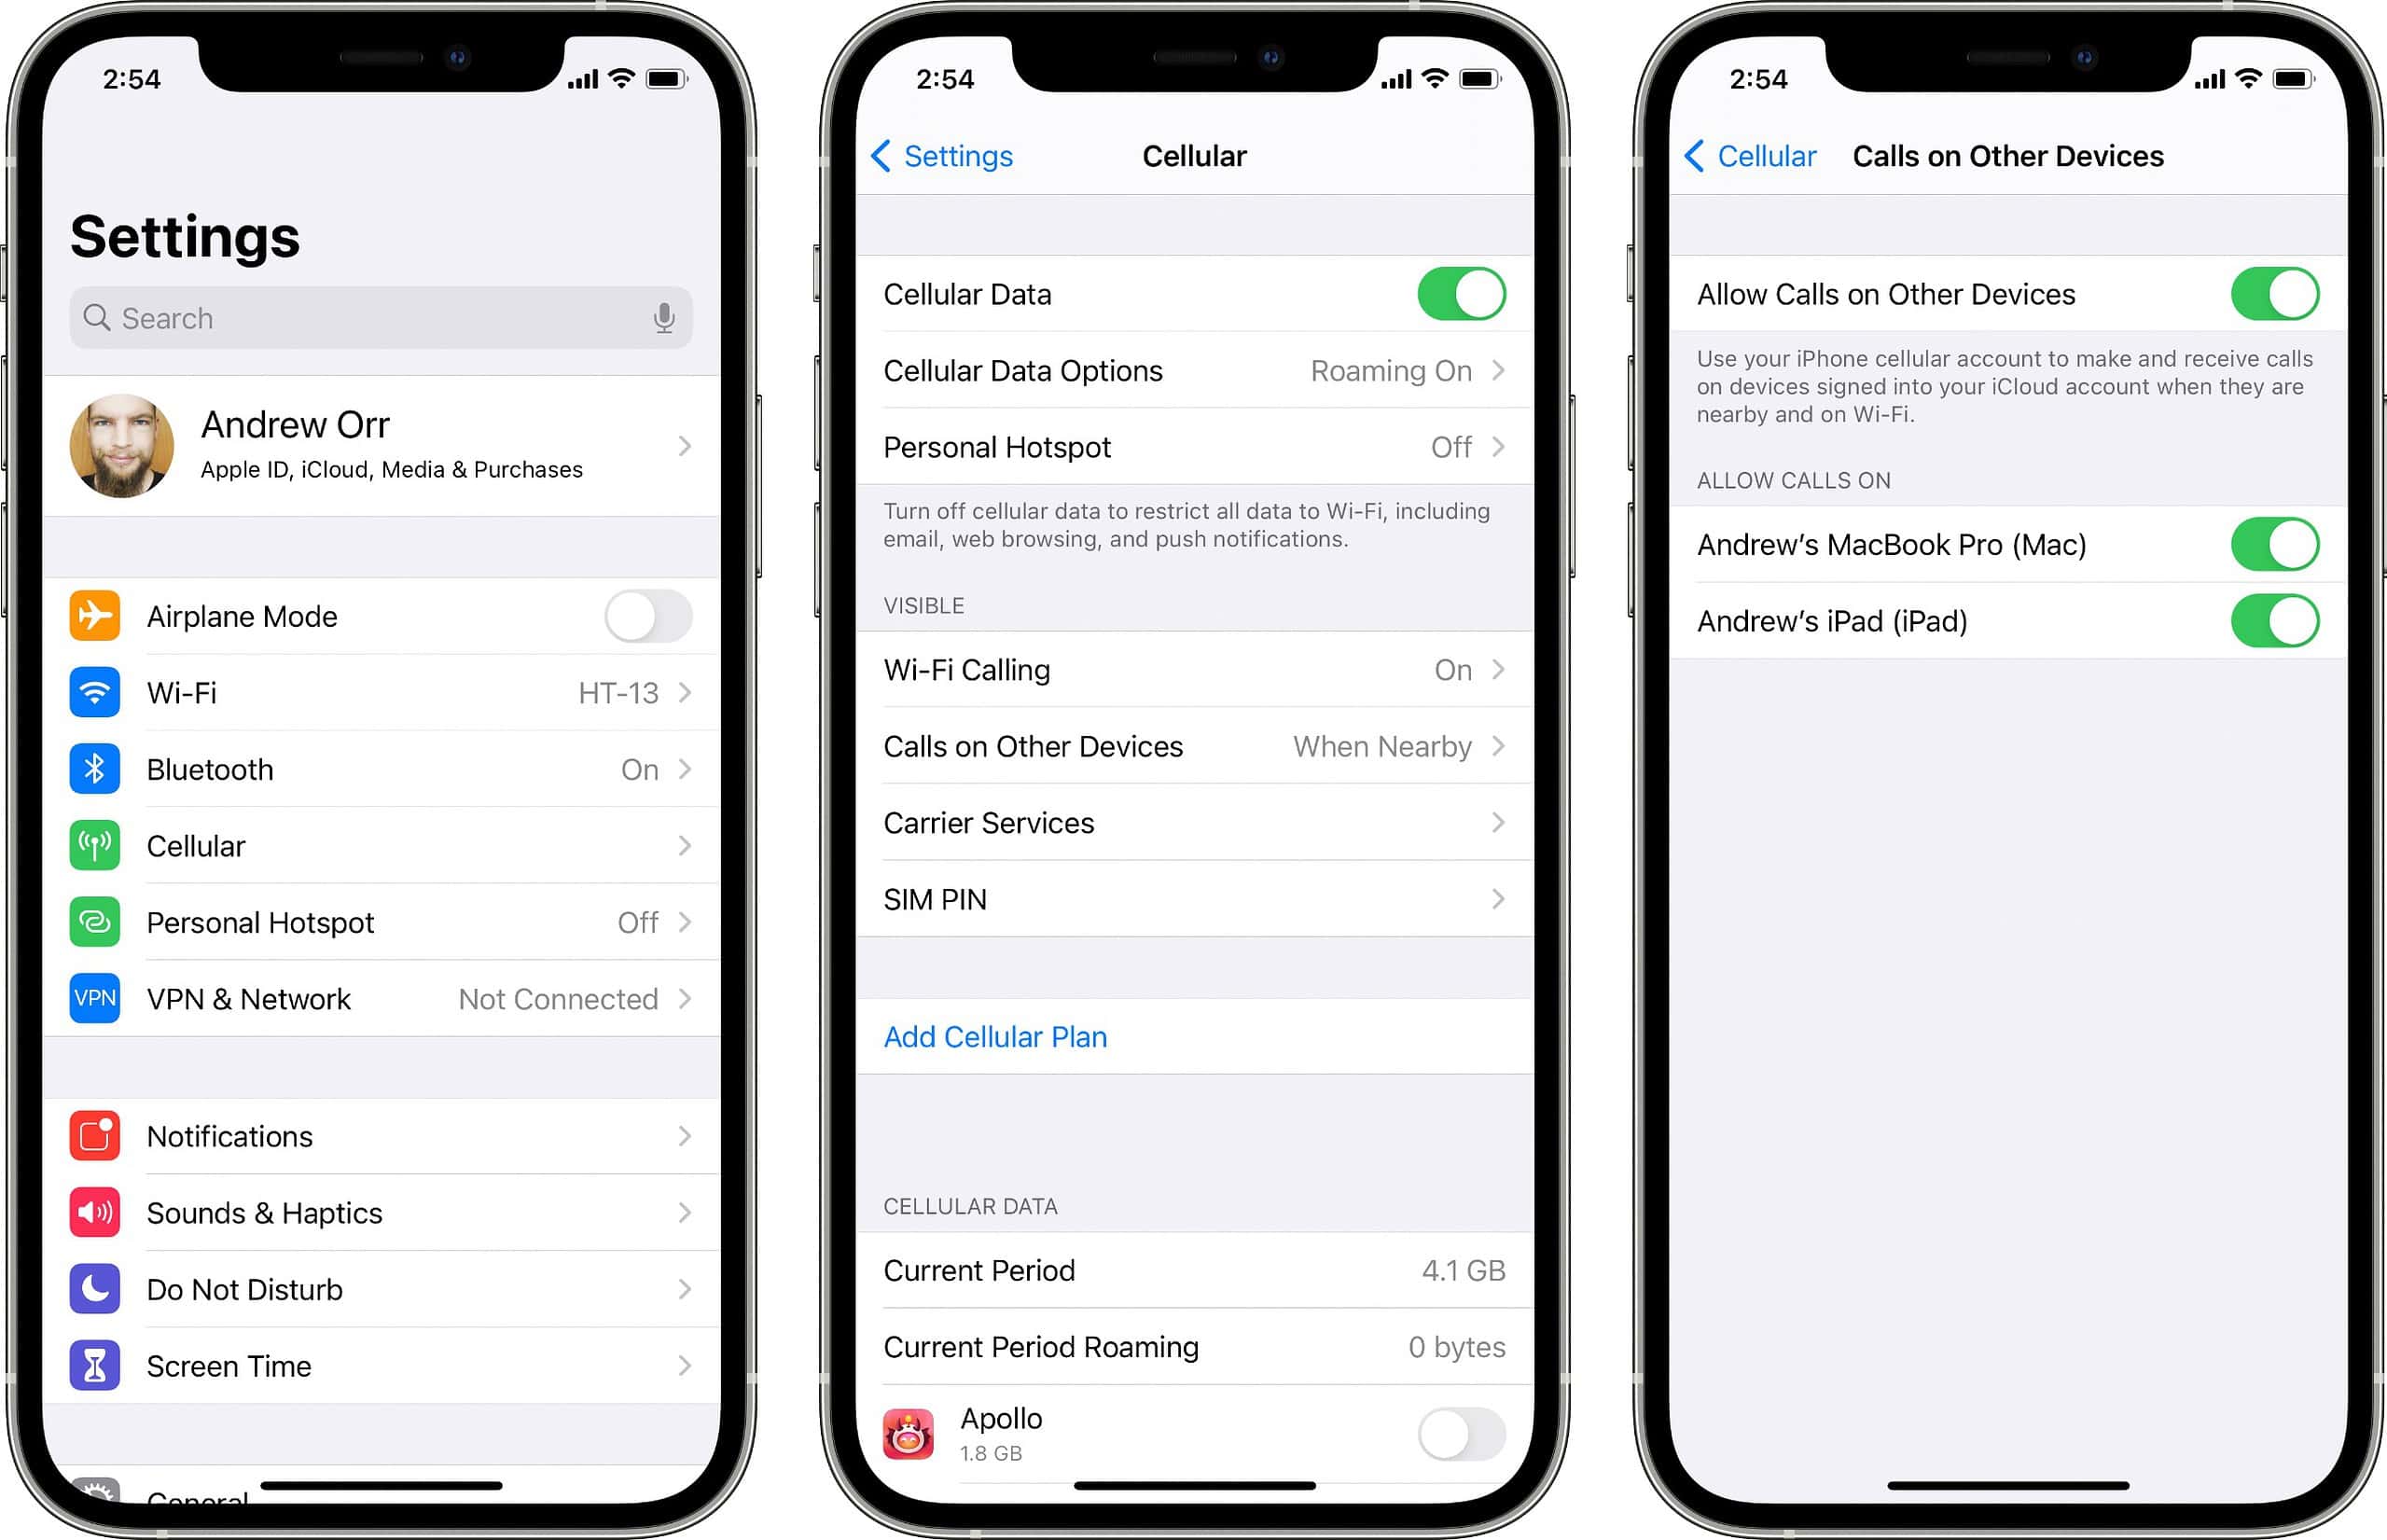 Screenshots of iPhone settings to manage calls on other Apple devices.